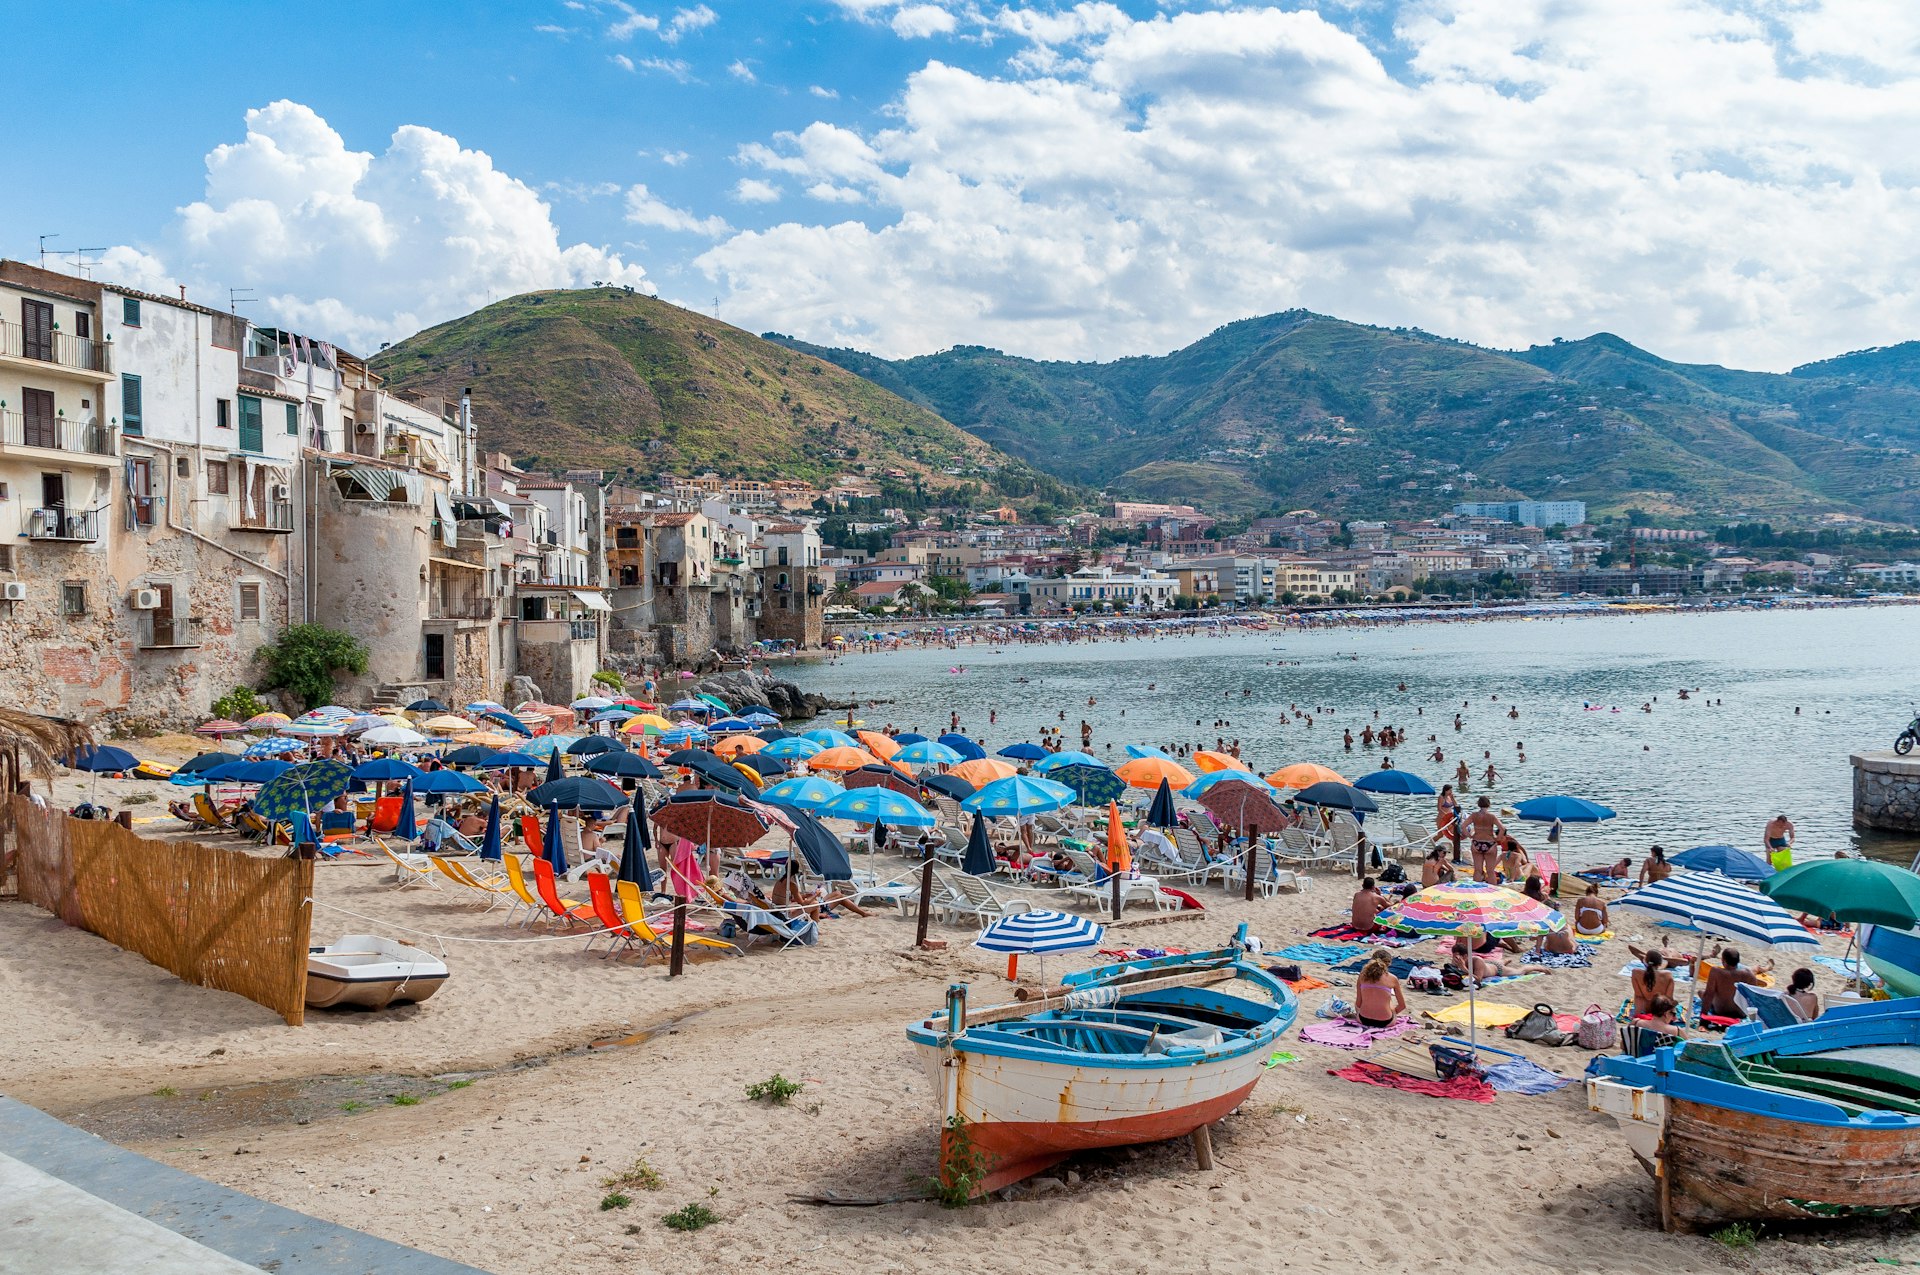 Fishing boats are marooned on the sands of Cefalu Beach in Italy. Behind them are a number of beach umbrellas where beach goers lie on the sand. In the background, the sea is visible, as are some buildings from a historic-looking port town.